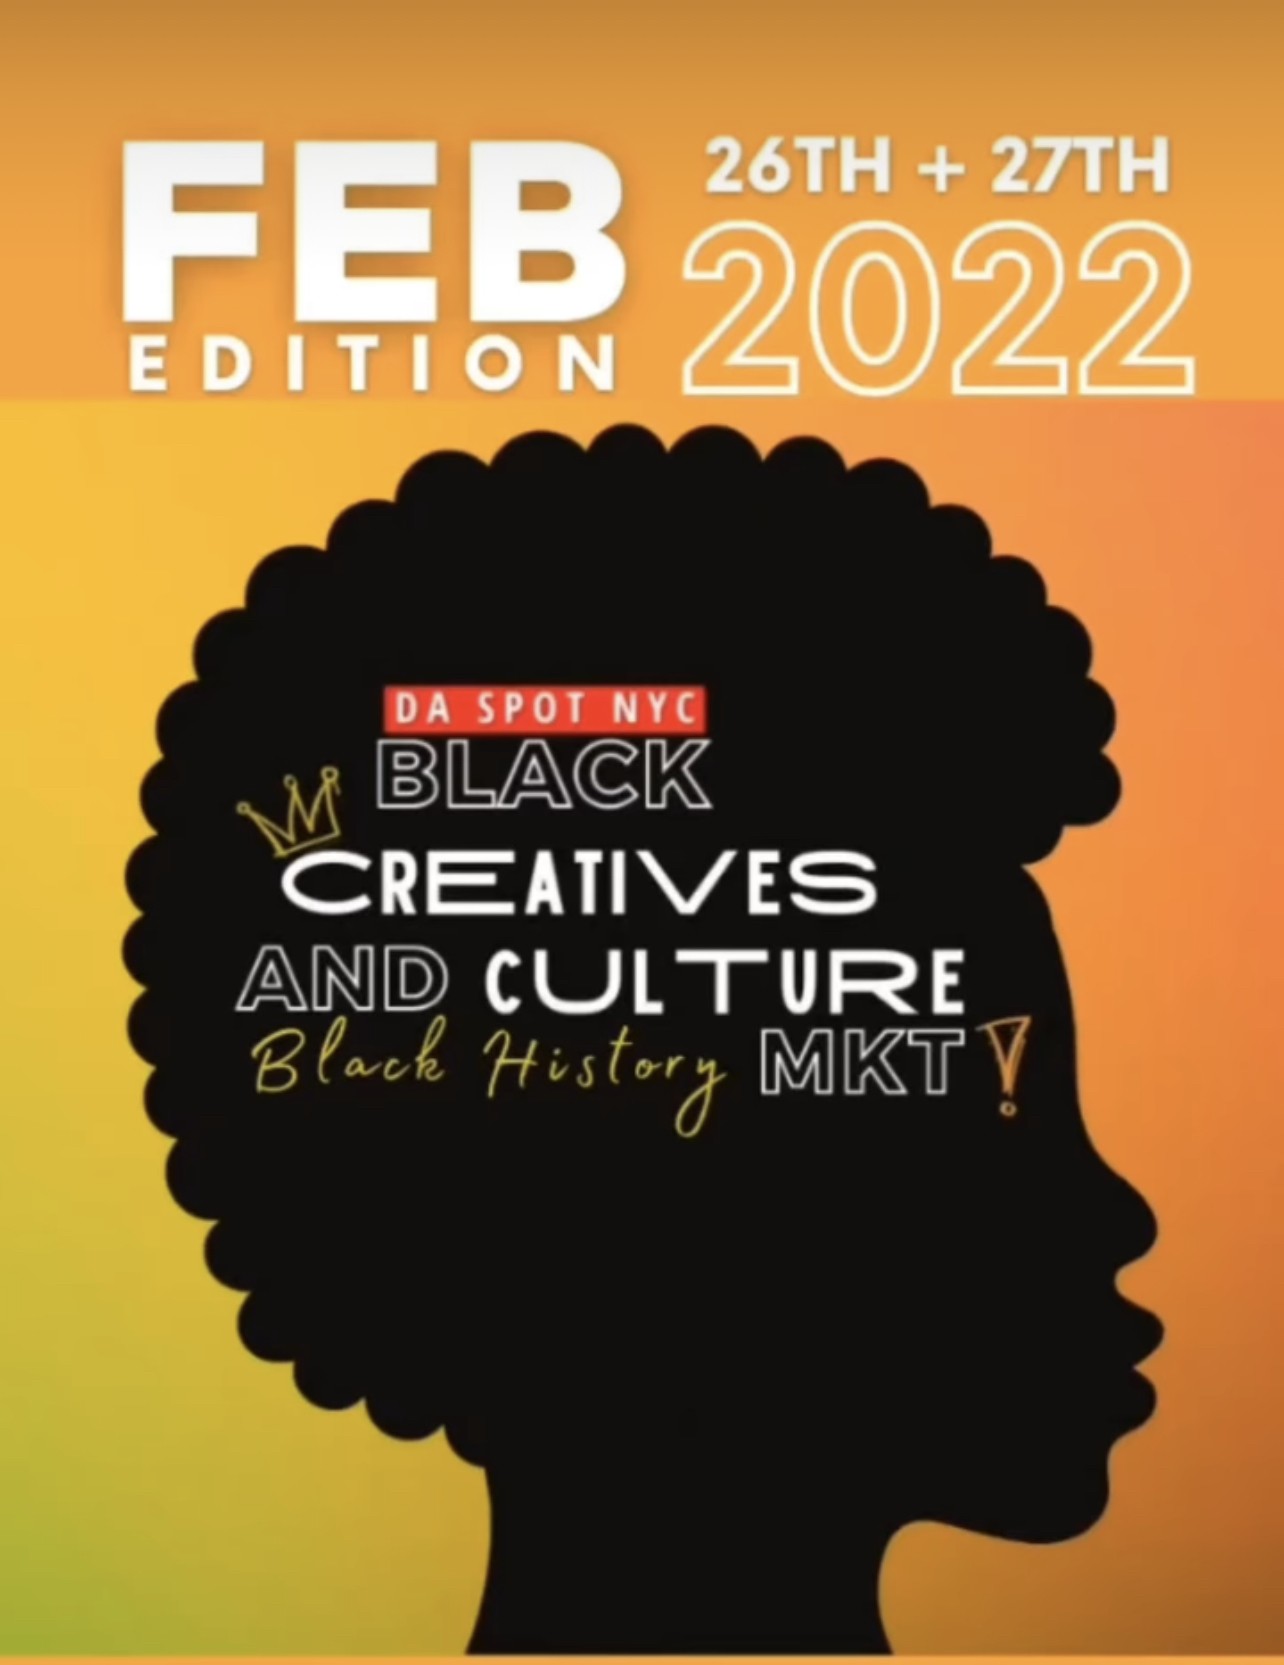 Black-Creatives-and-Culture-Black-History-Market-panel-february-26-to-27